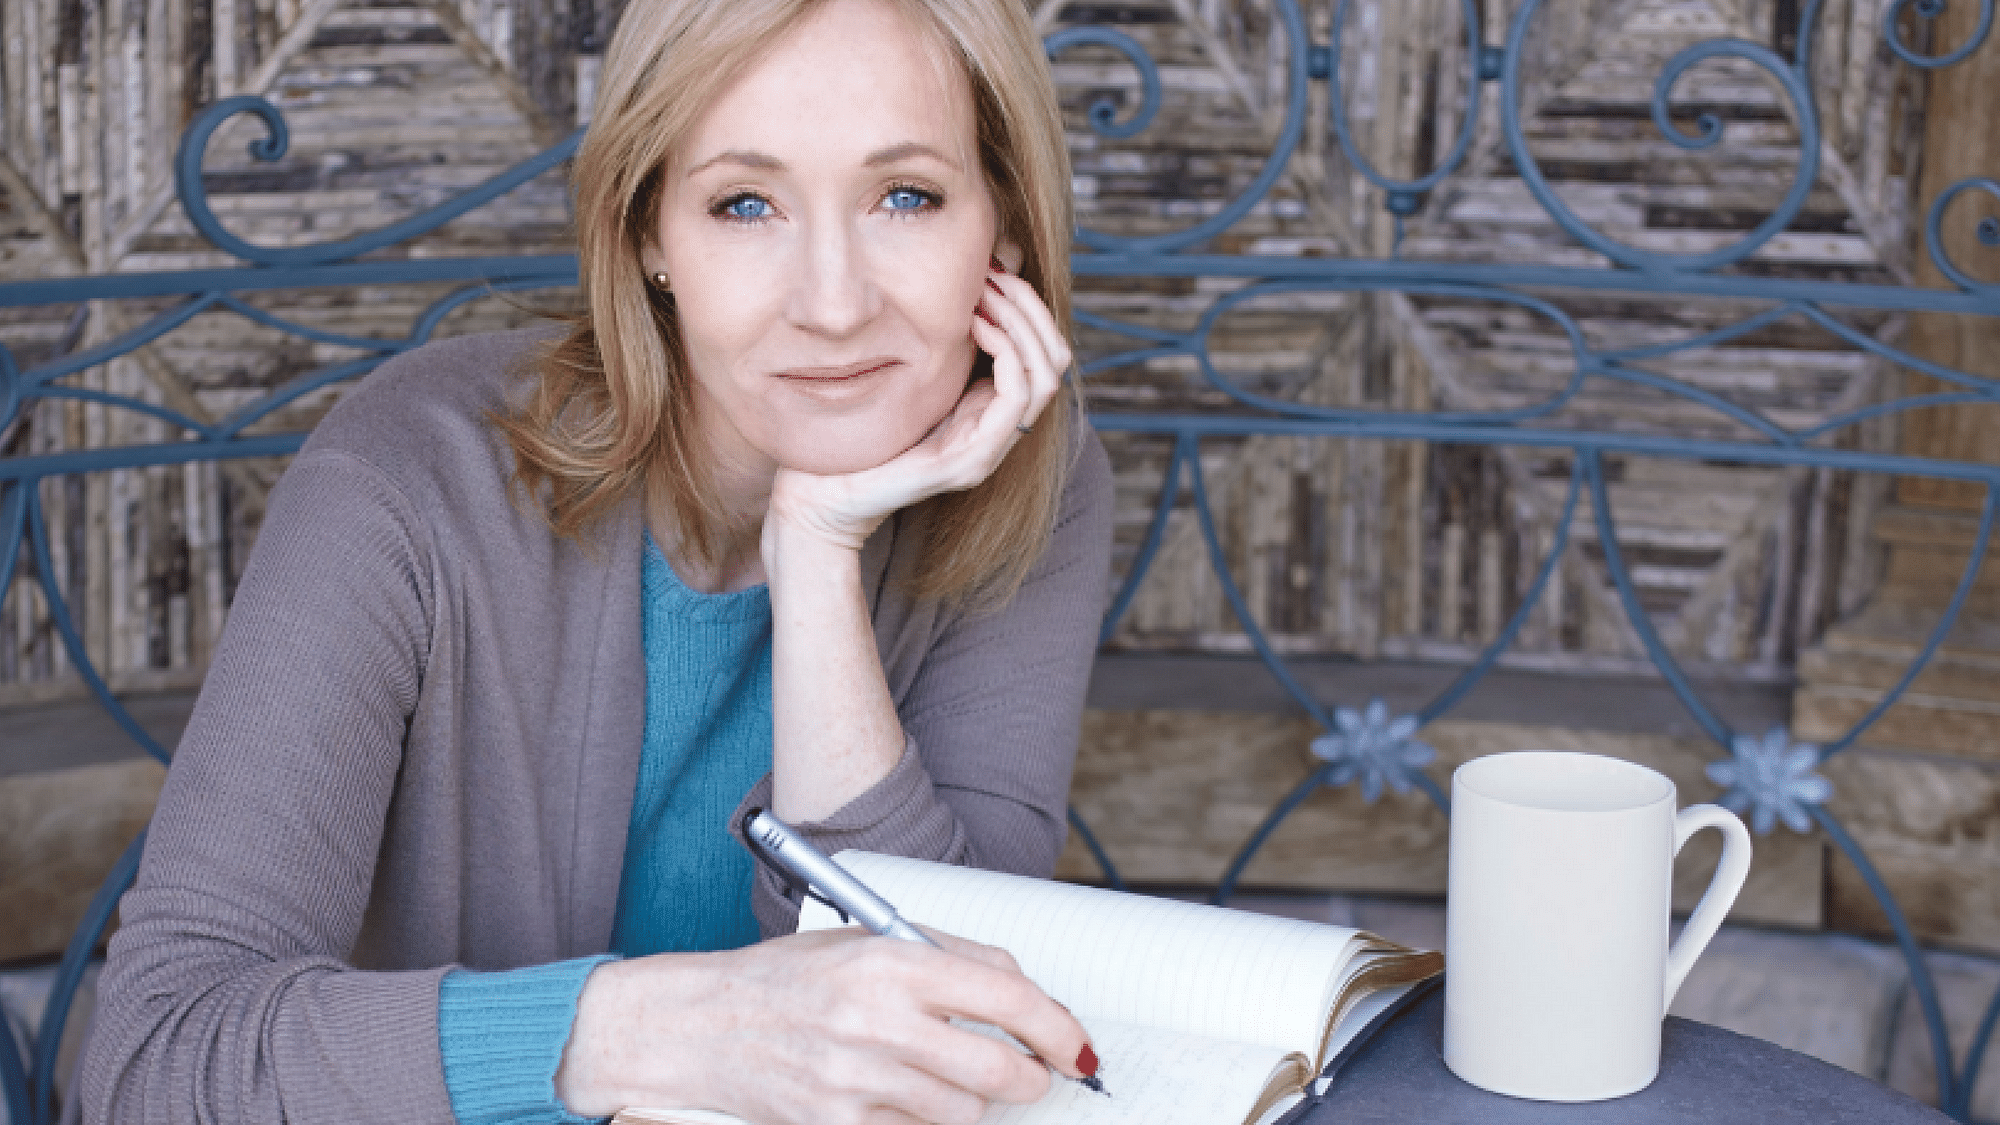 Novelist JK Rowling and TV personality Piers Morgan were locked in an intense Twitter battle. (Photo Courtesy: Wikimedia Commons)